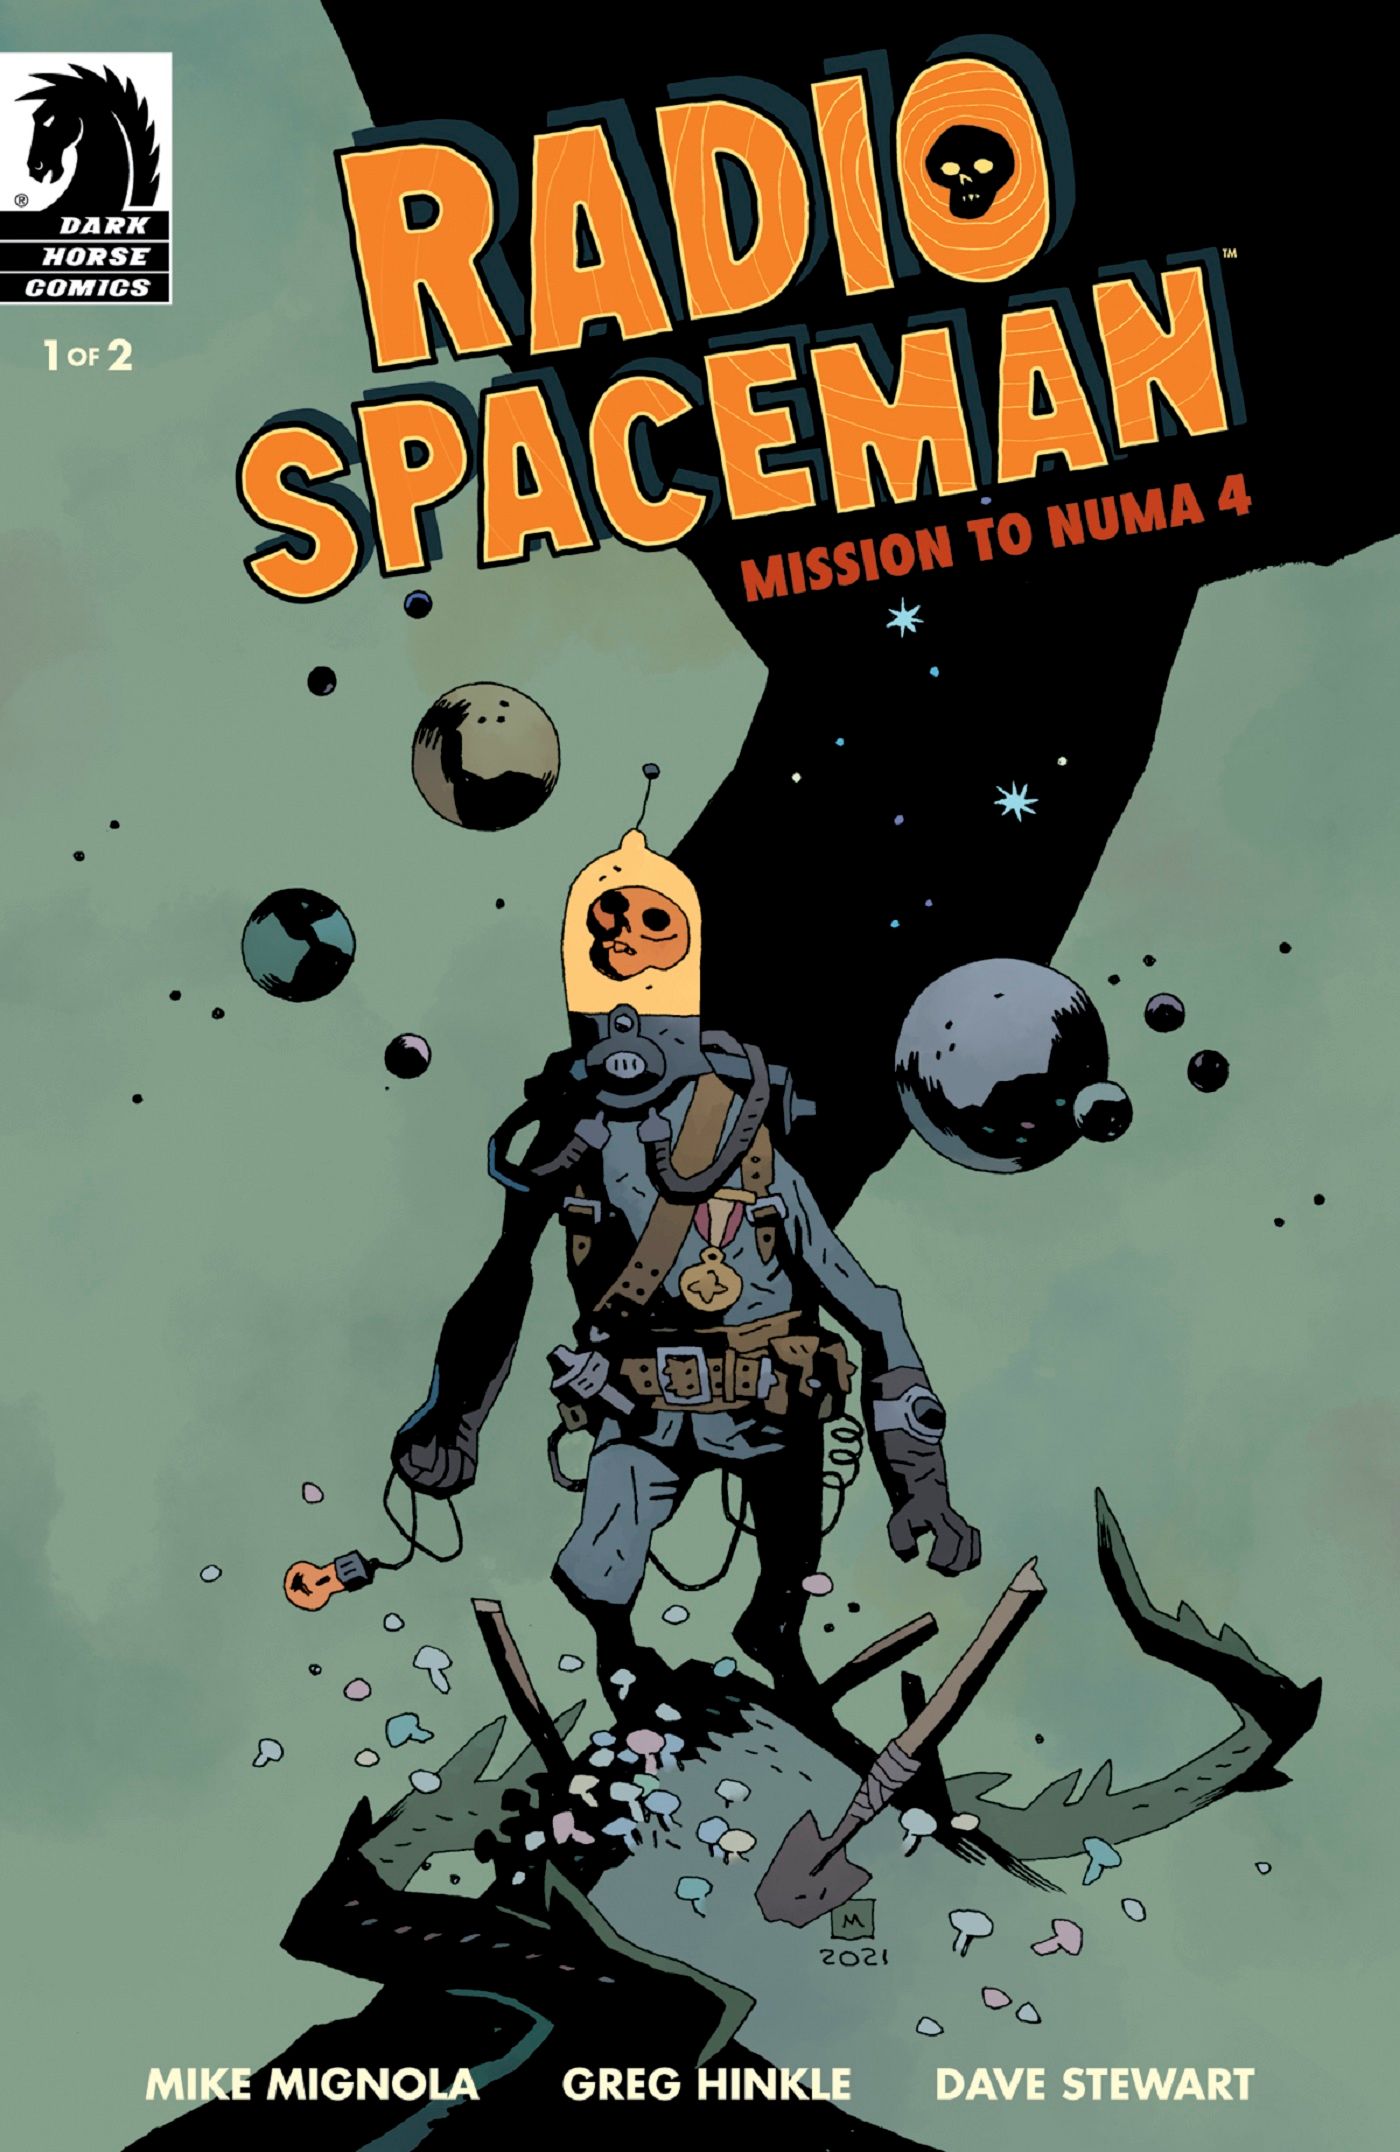 Hellboy Creator Launches New Comic Radio Spaceman From Dark Horse